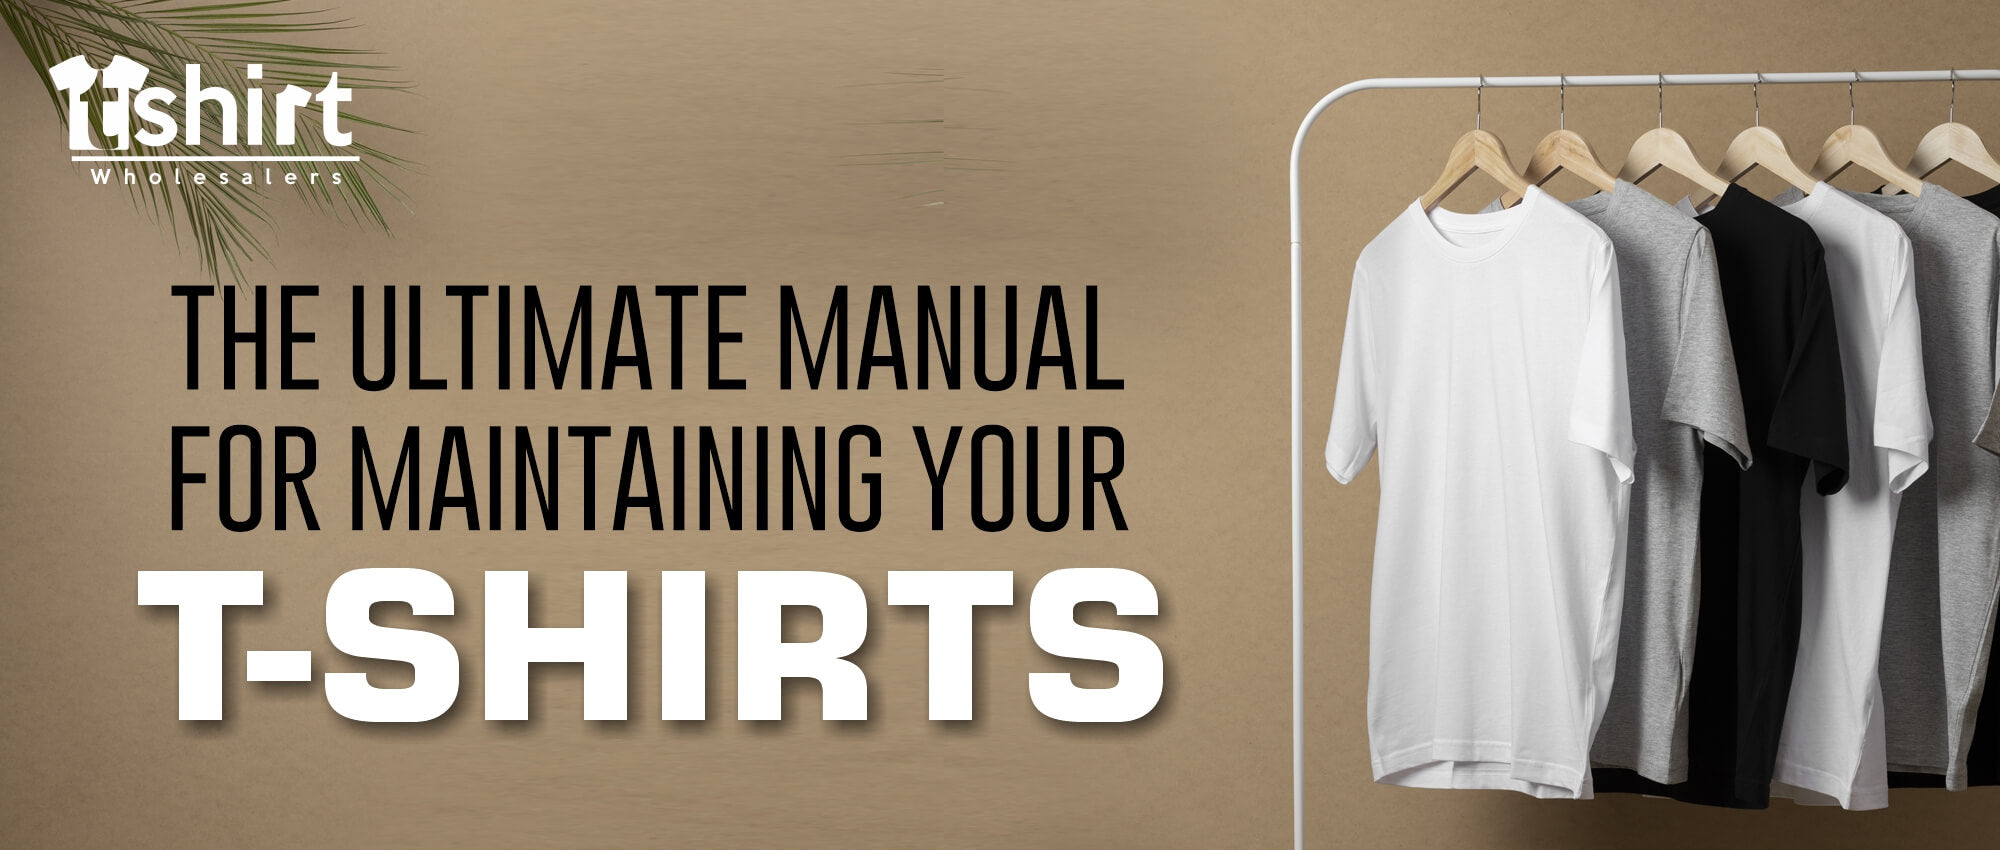 THE ULTIMATE MANUAL FOR MAINTAINING YOUR T-SHIRTS